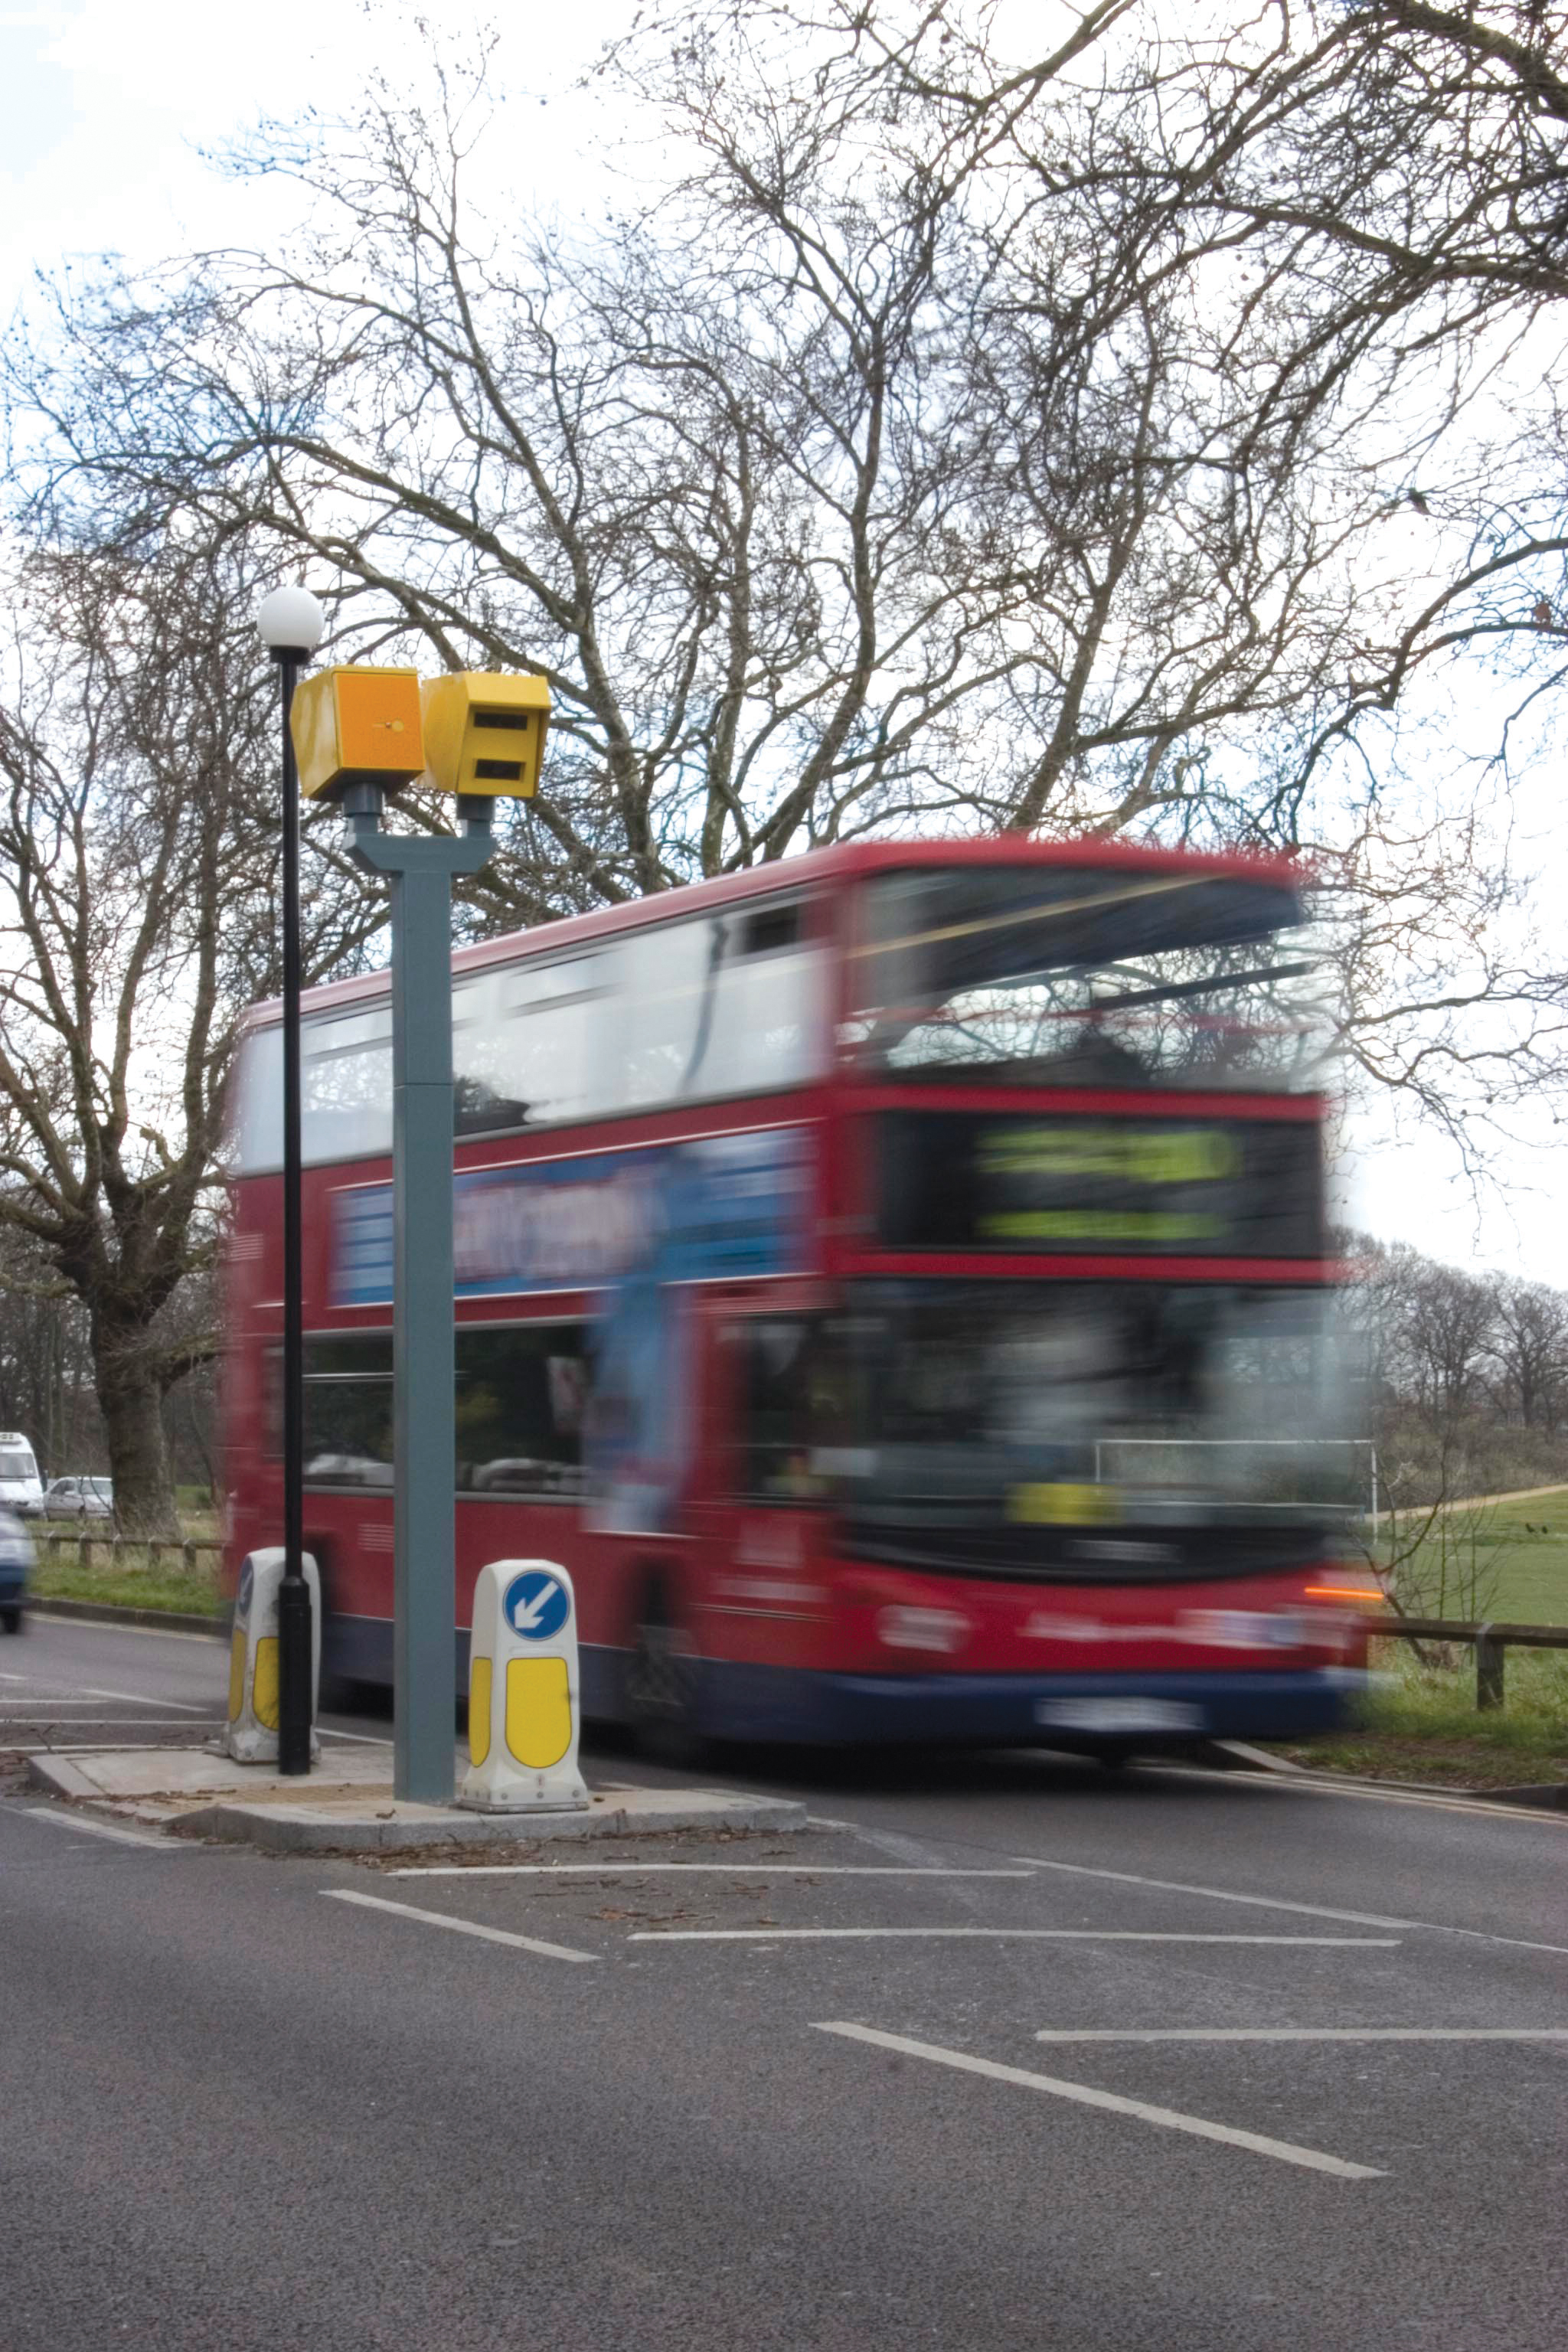 UK bus and speed cameras